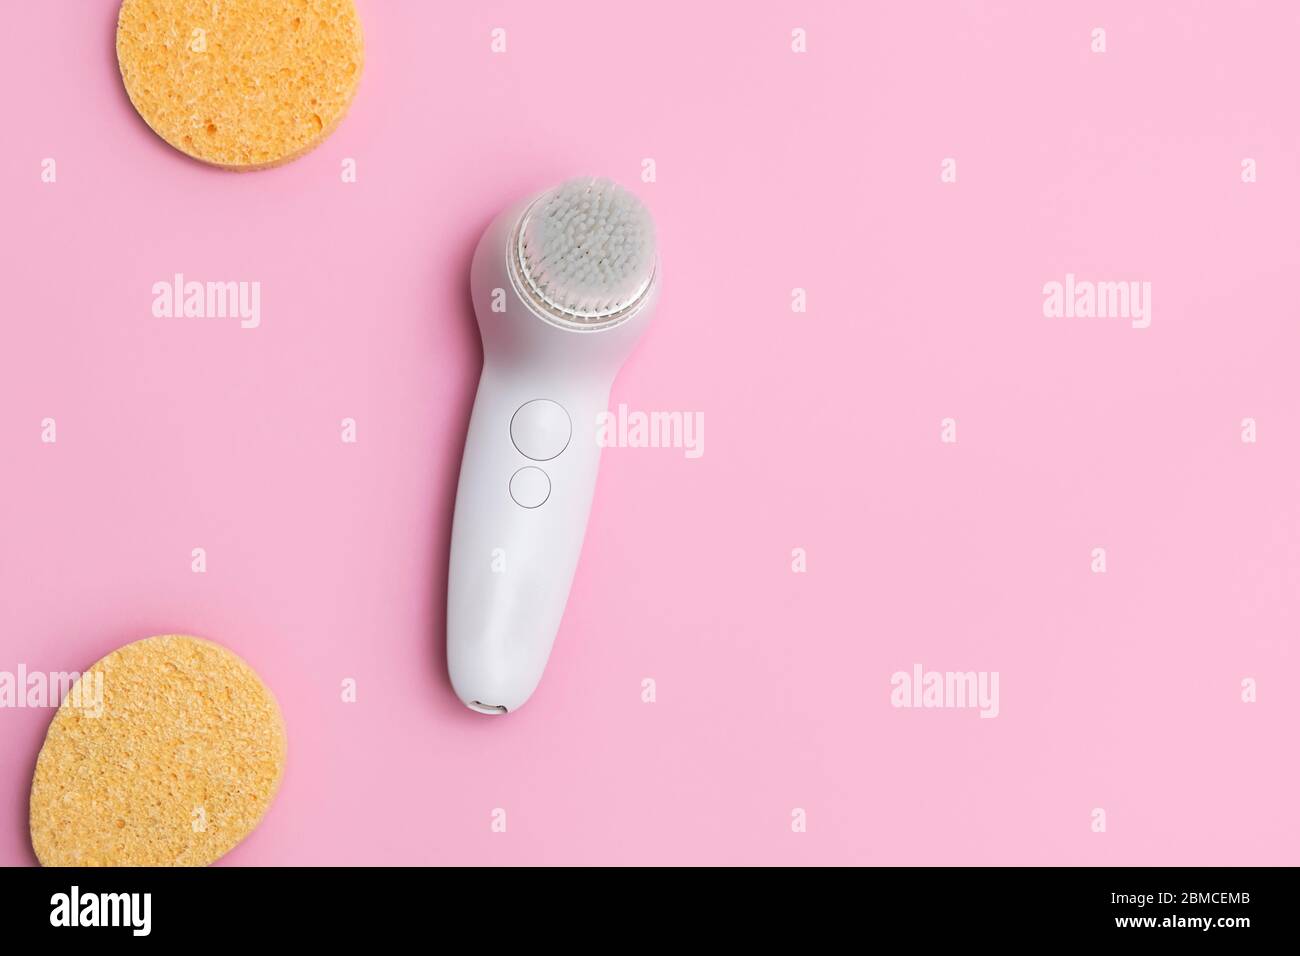 Top view of electric facial brush and face sponges on soft pink background with space for text Stock Photo